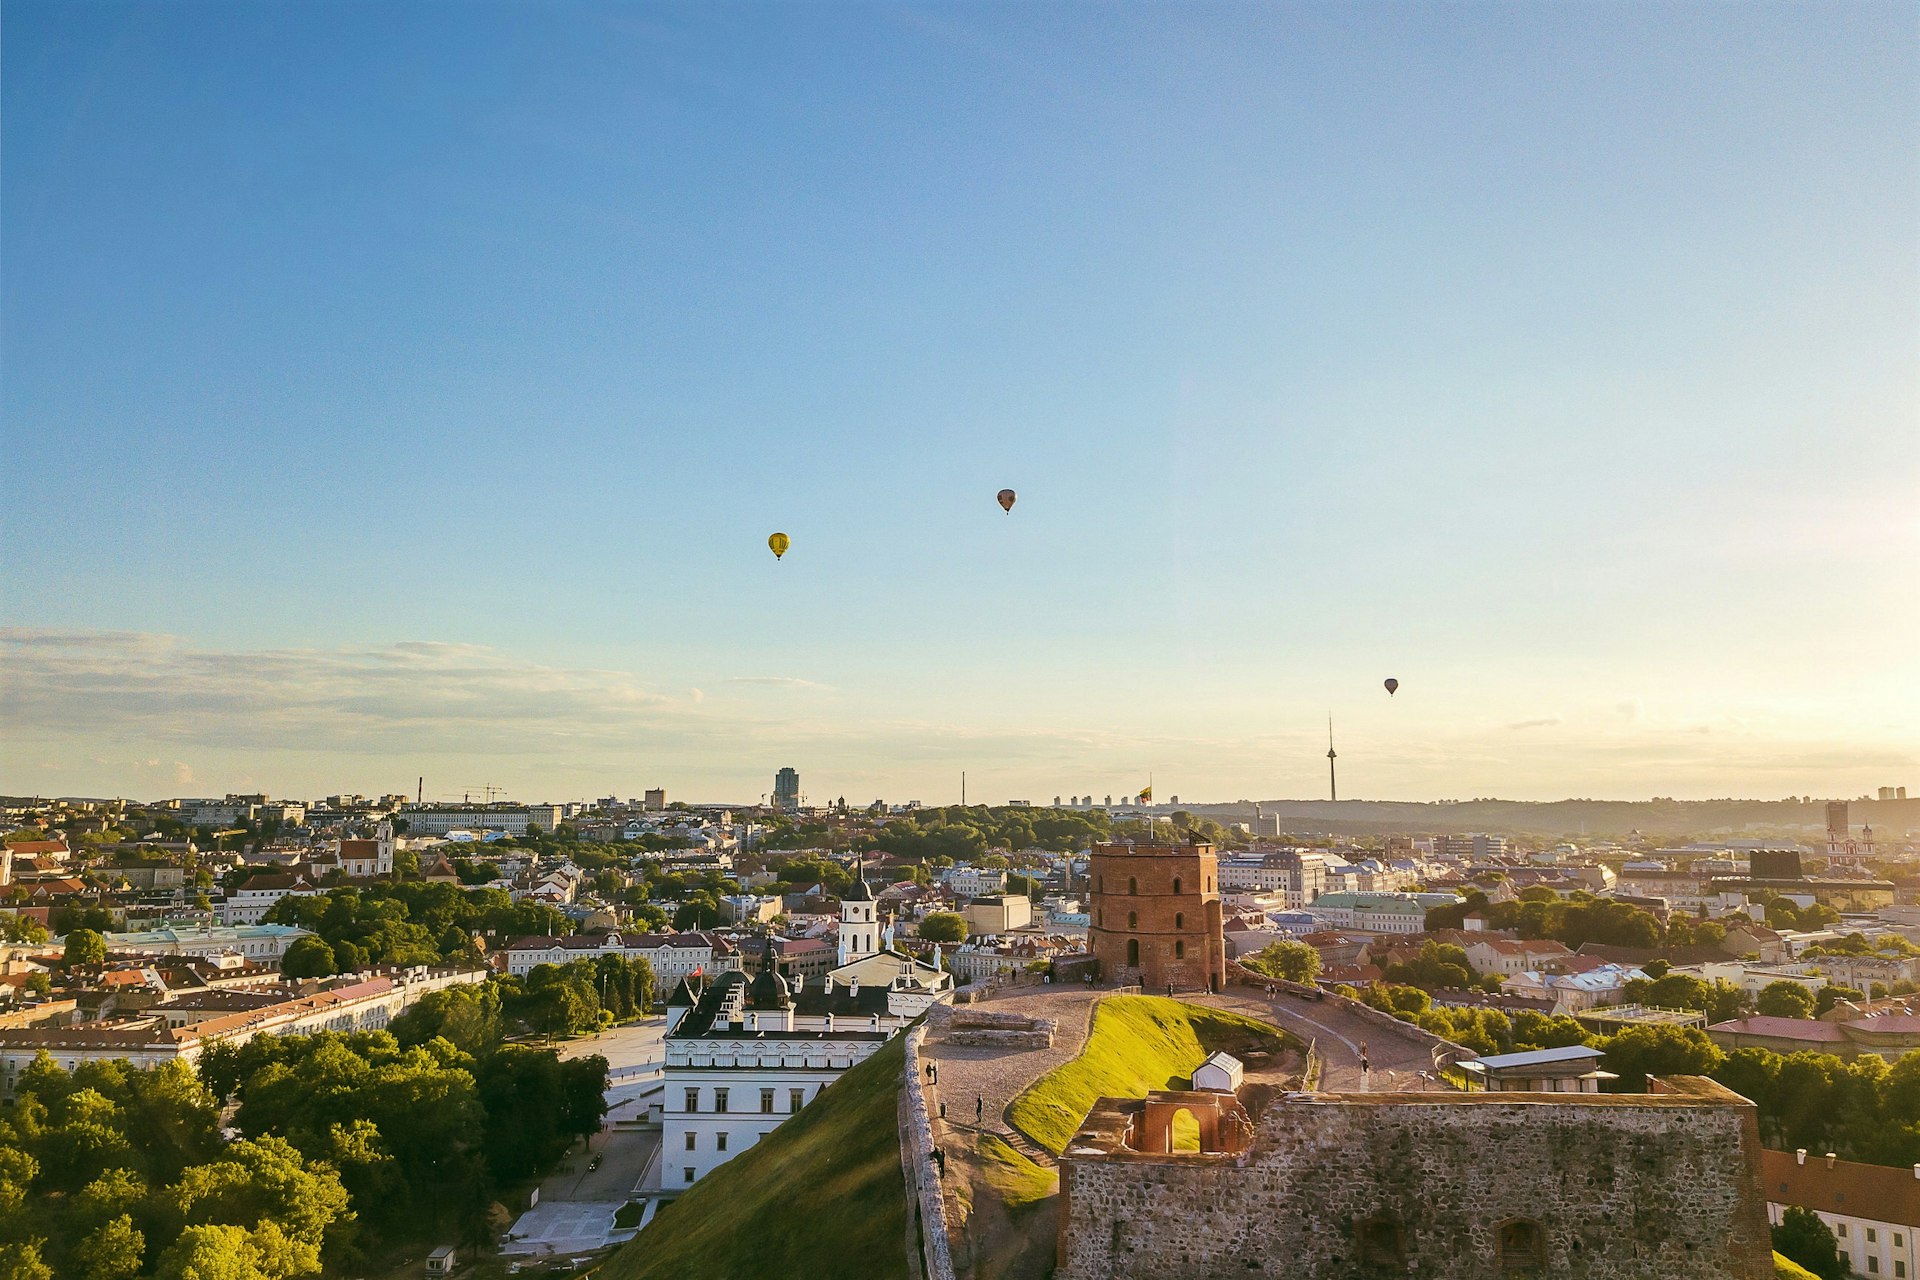 Panorama of Vilnius with hot air balloons in the sky, taken over the Gediminas Hill © A. Aleksandravicius / Shutterstock